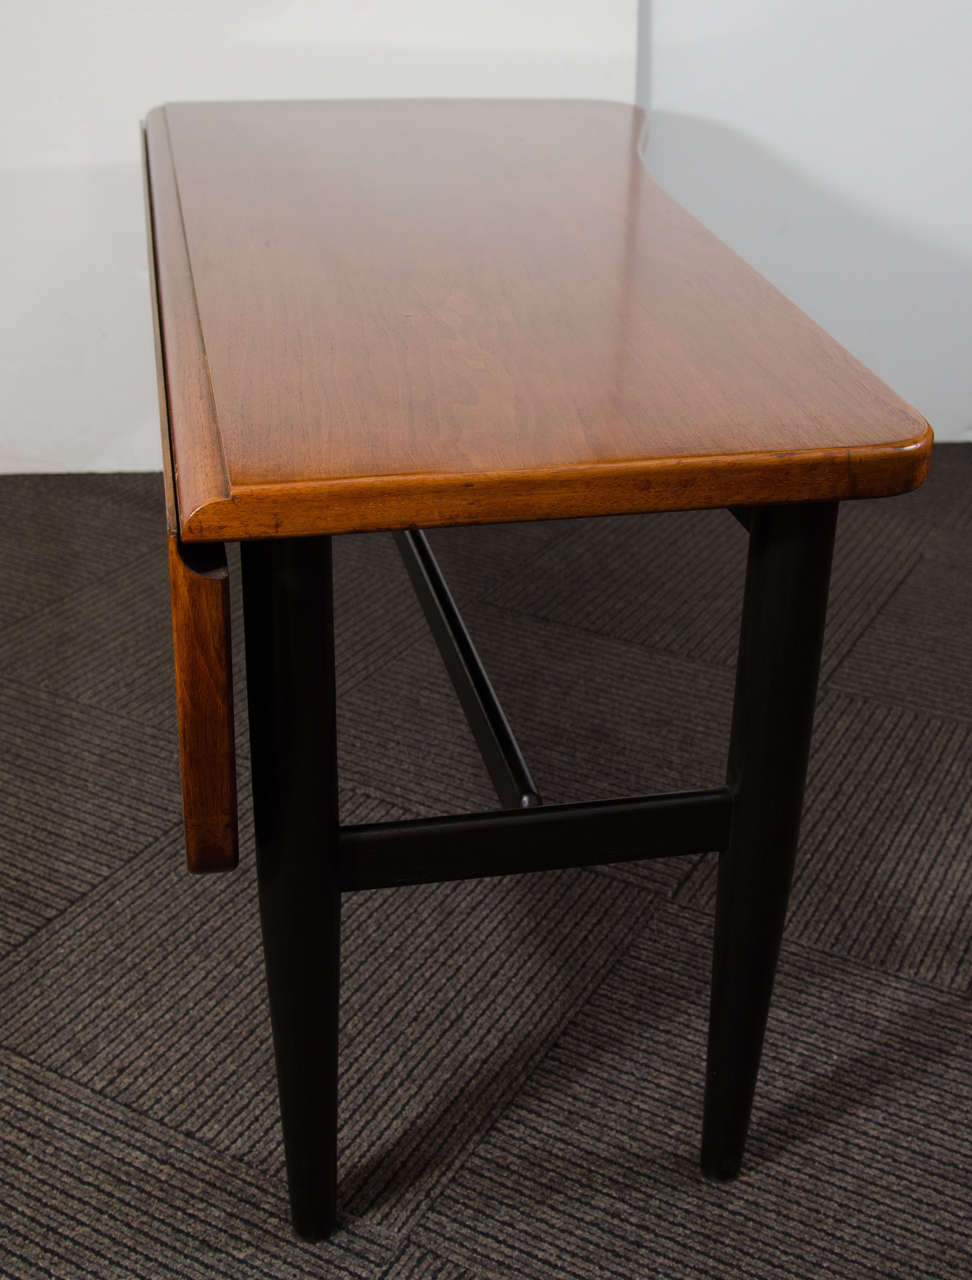 Mid-Century Modern Midcentury Asymmetrical Drop Leaf Wooden Coffee or Cocktail Table by Baker